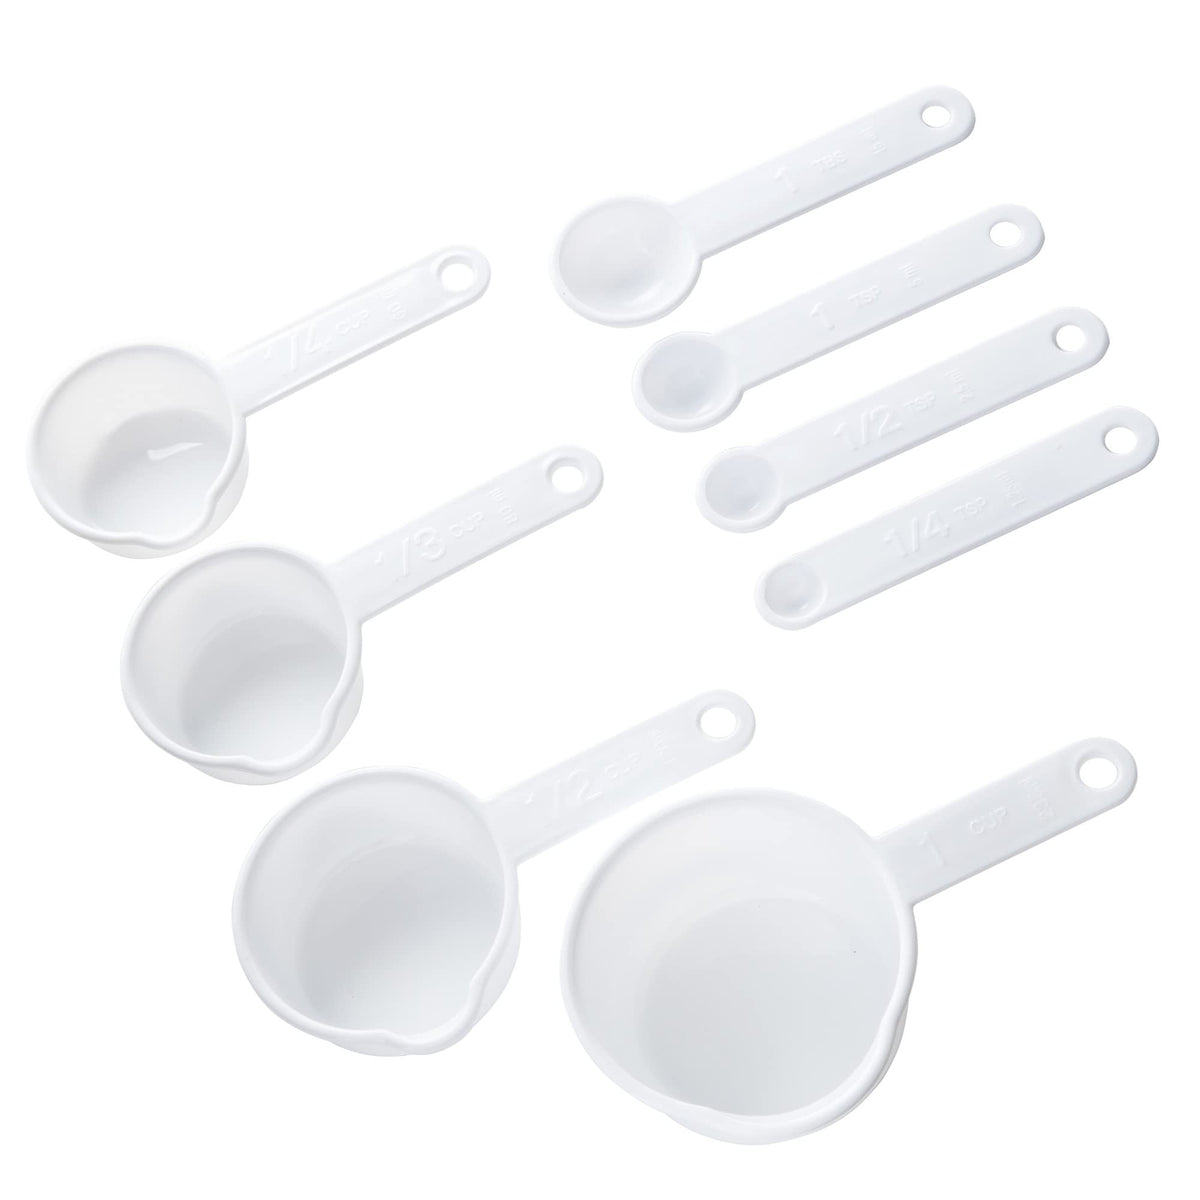 Chef Craft 4pc Nesting Measuring Scoop & Spoon Combo Set - Measure 1/4 tsp  to 1 Cup